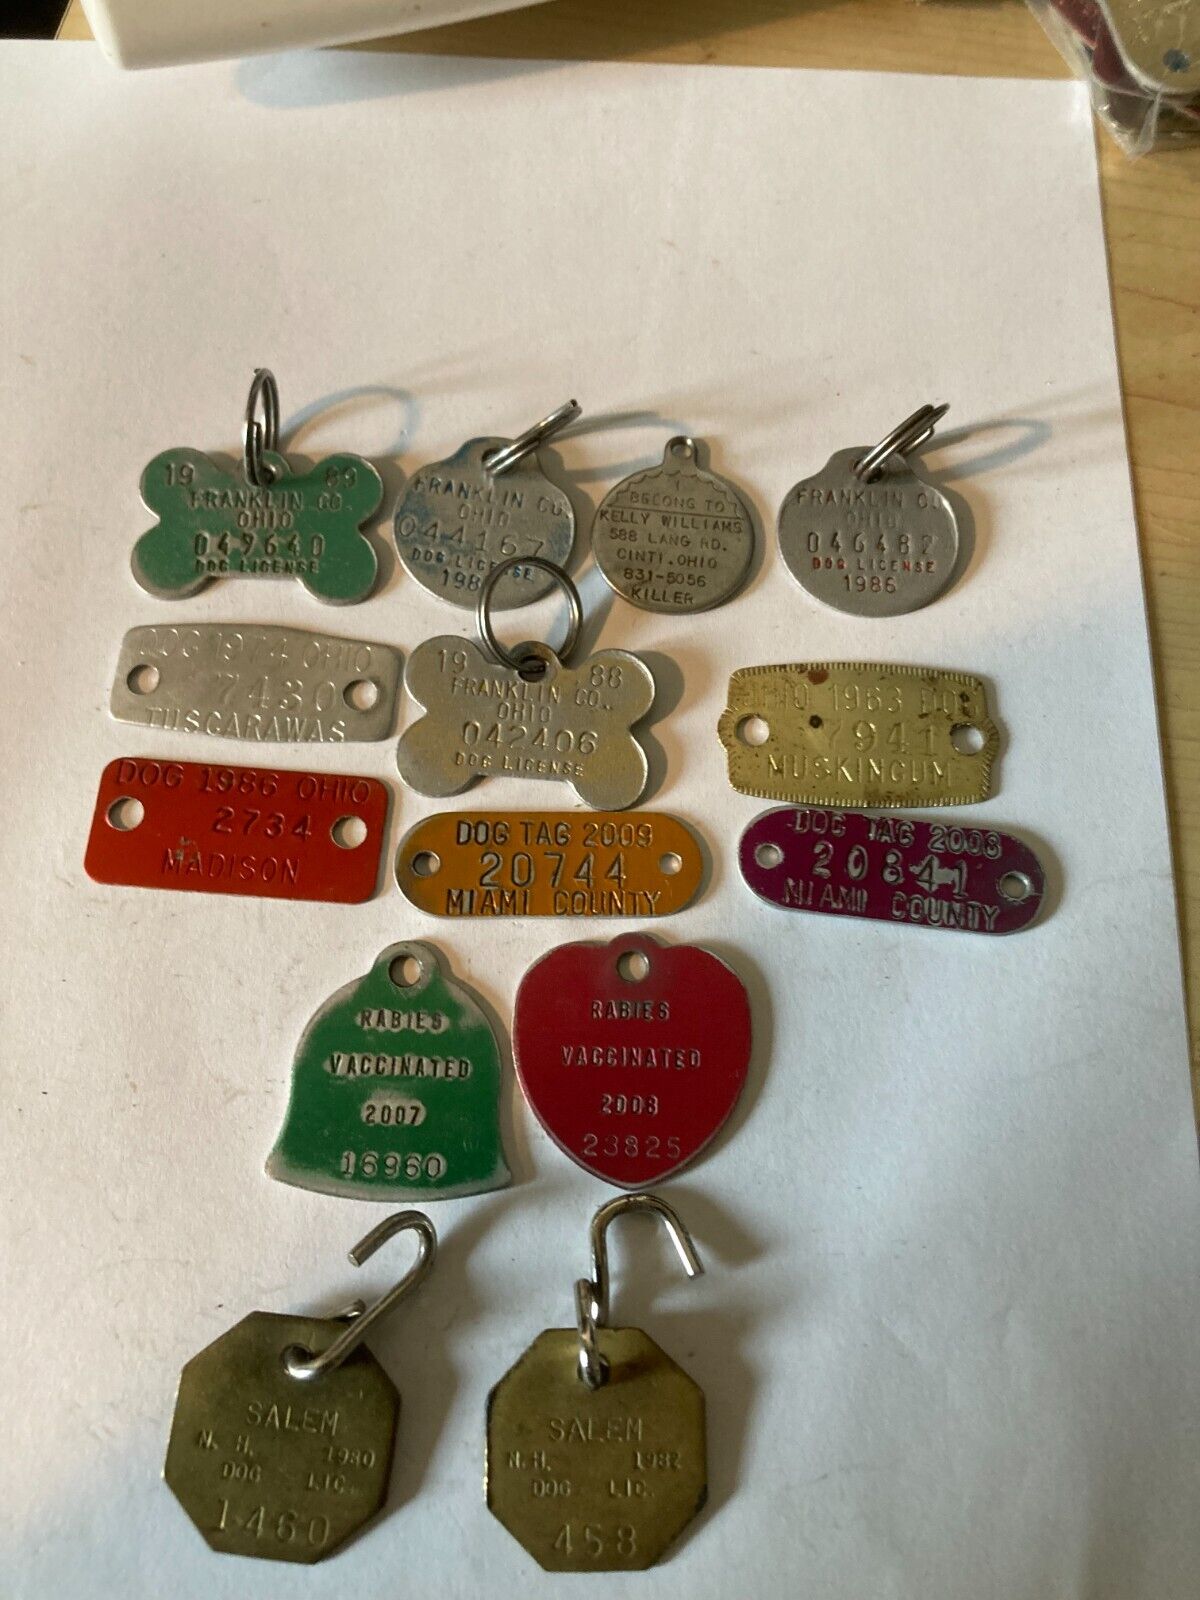 LOT OF 10 OHIO AND 2 N.H. DOG 2 RABIES VACS.TAGS